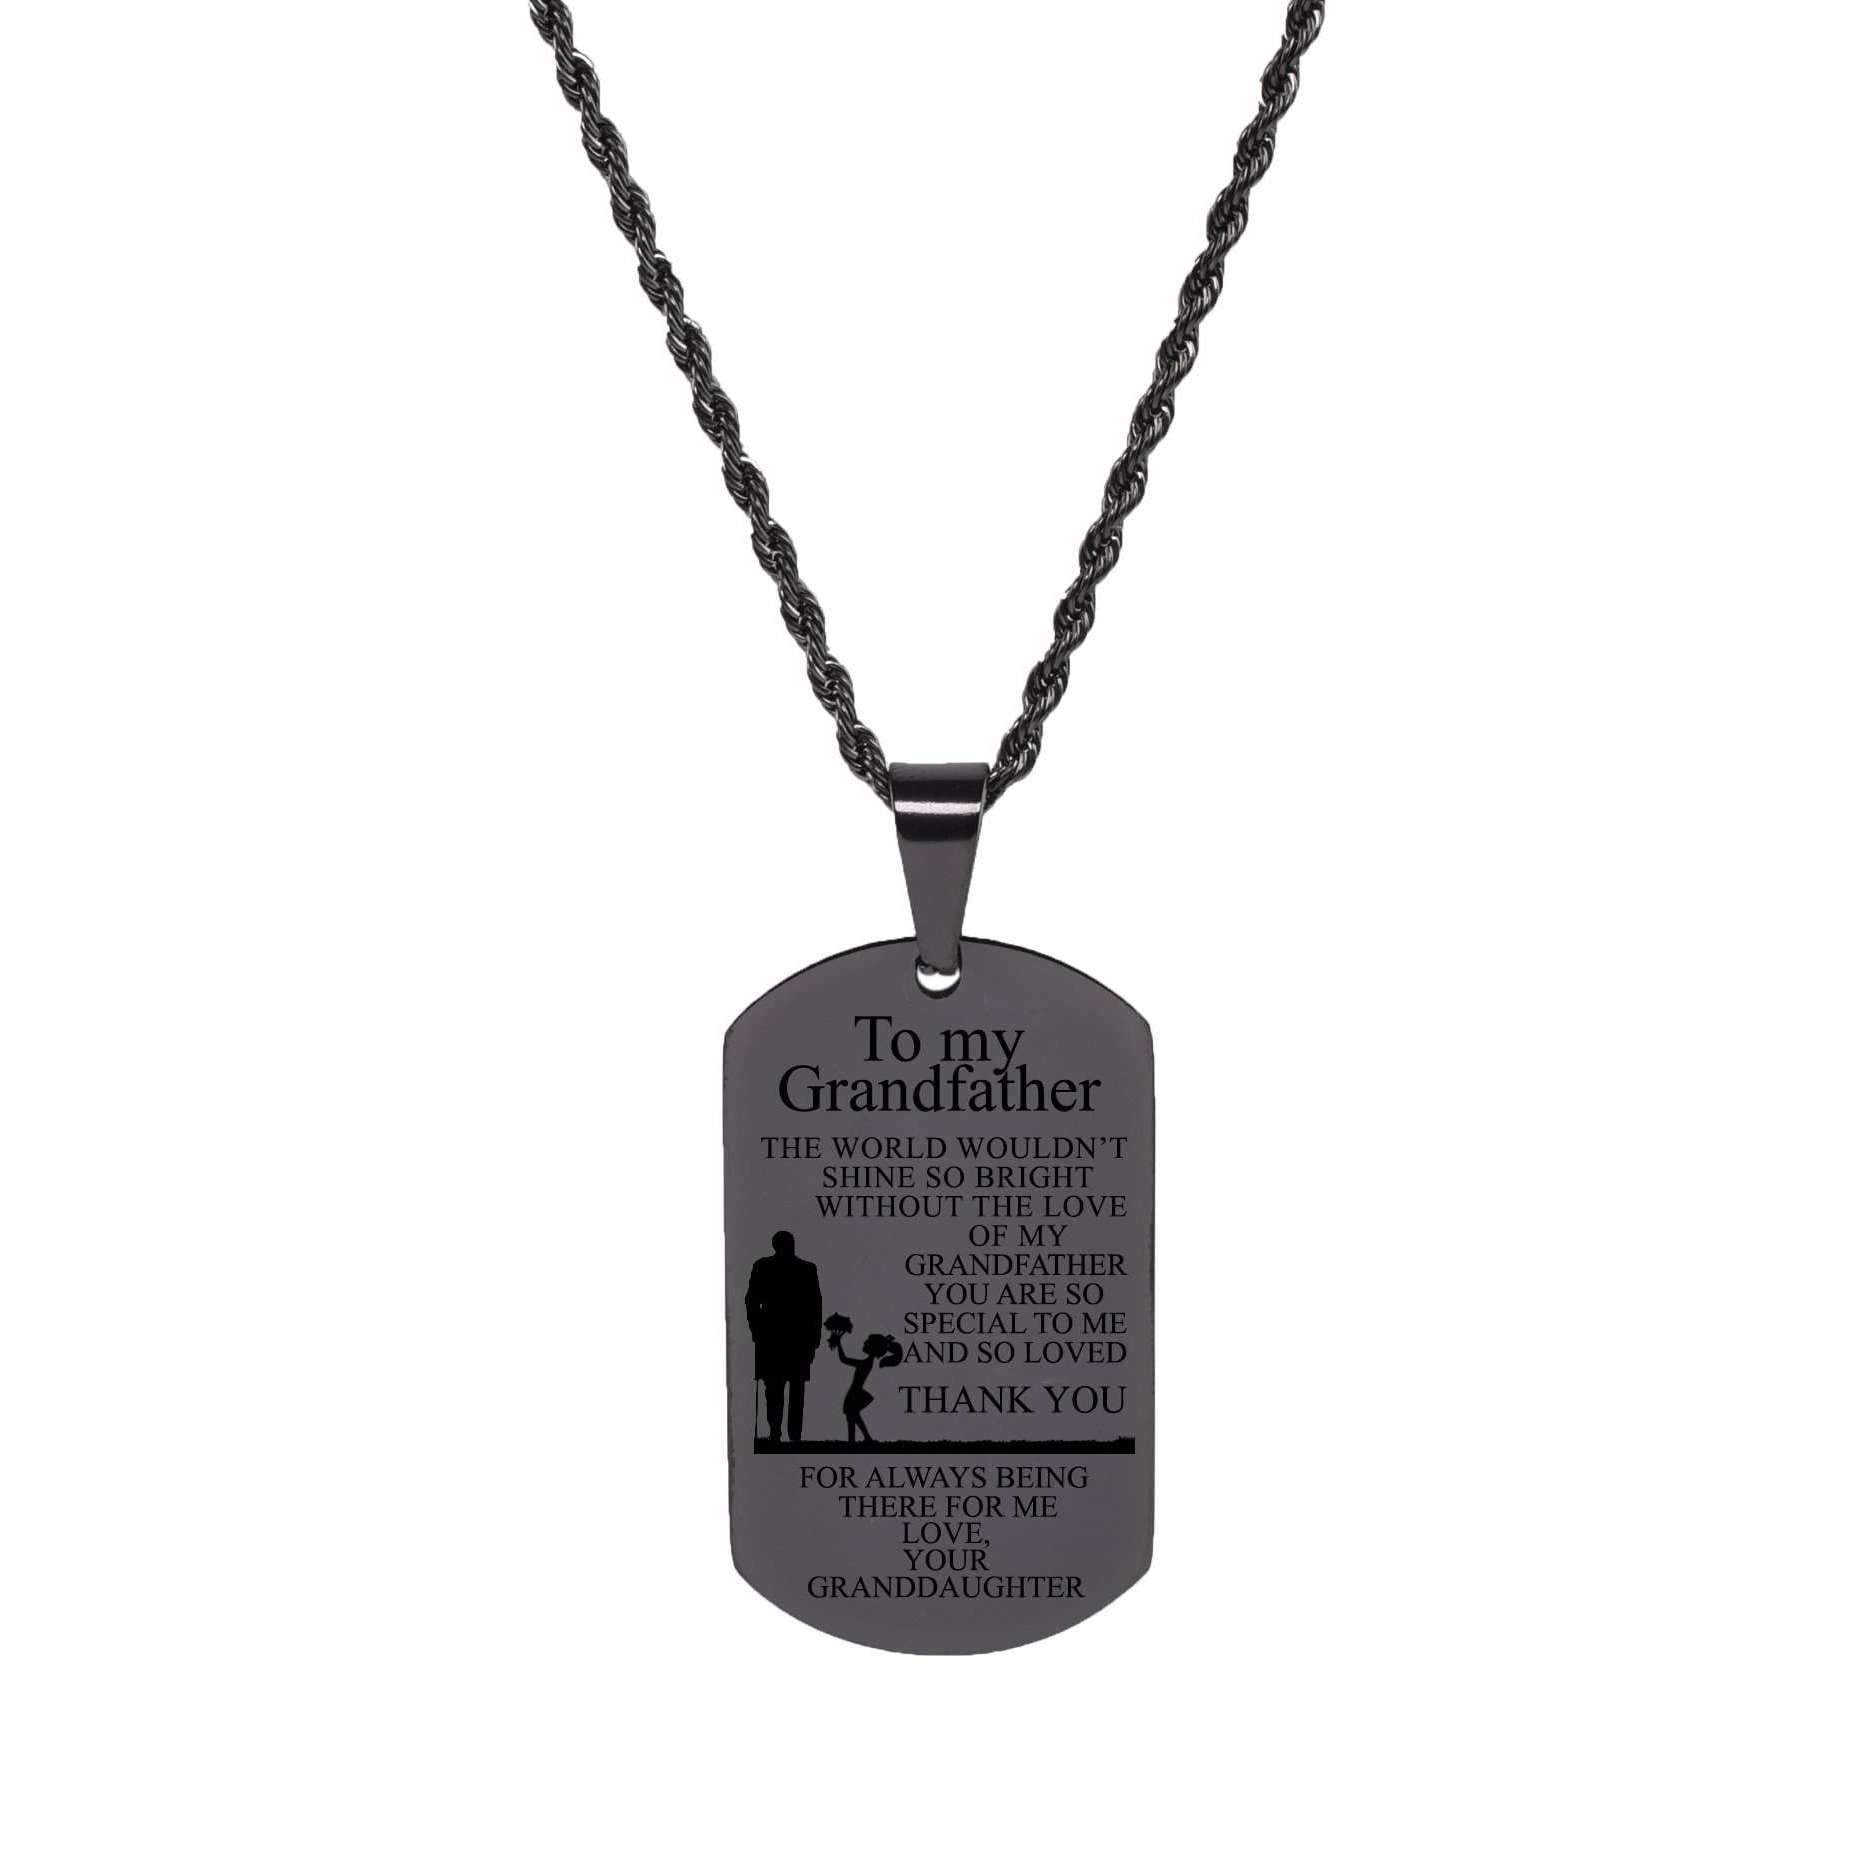 To My Granddaughter Dog Tag Necklace Grandpa Best Birthday Christmas Gifts 